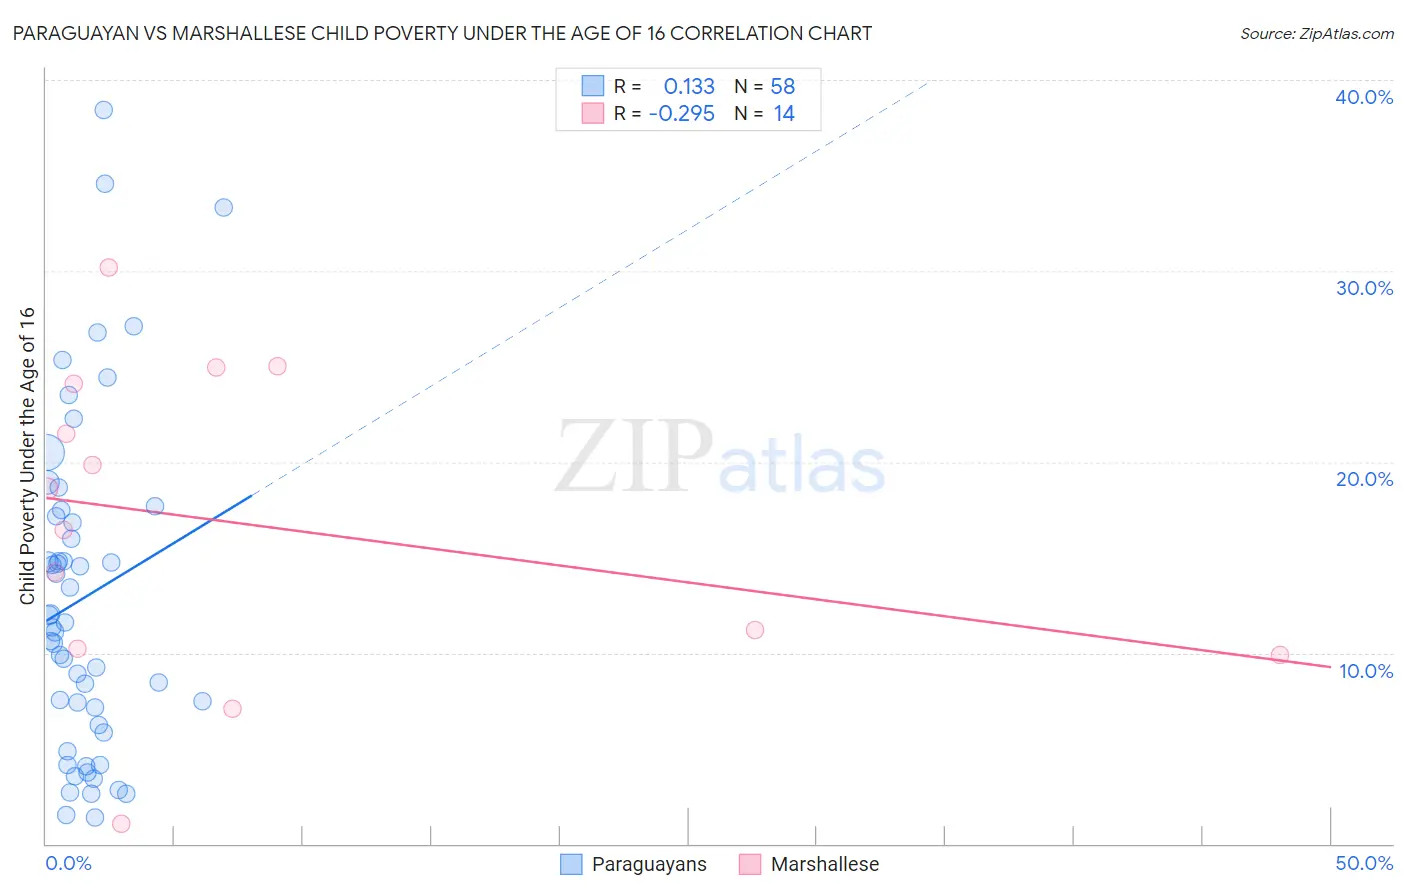 Paraguayan vs Marshallese Child Poverty Under the Age of 16